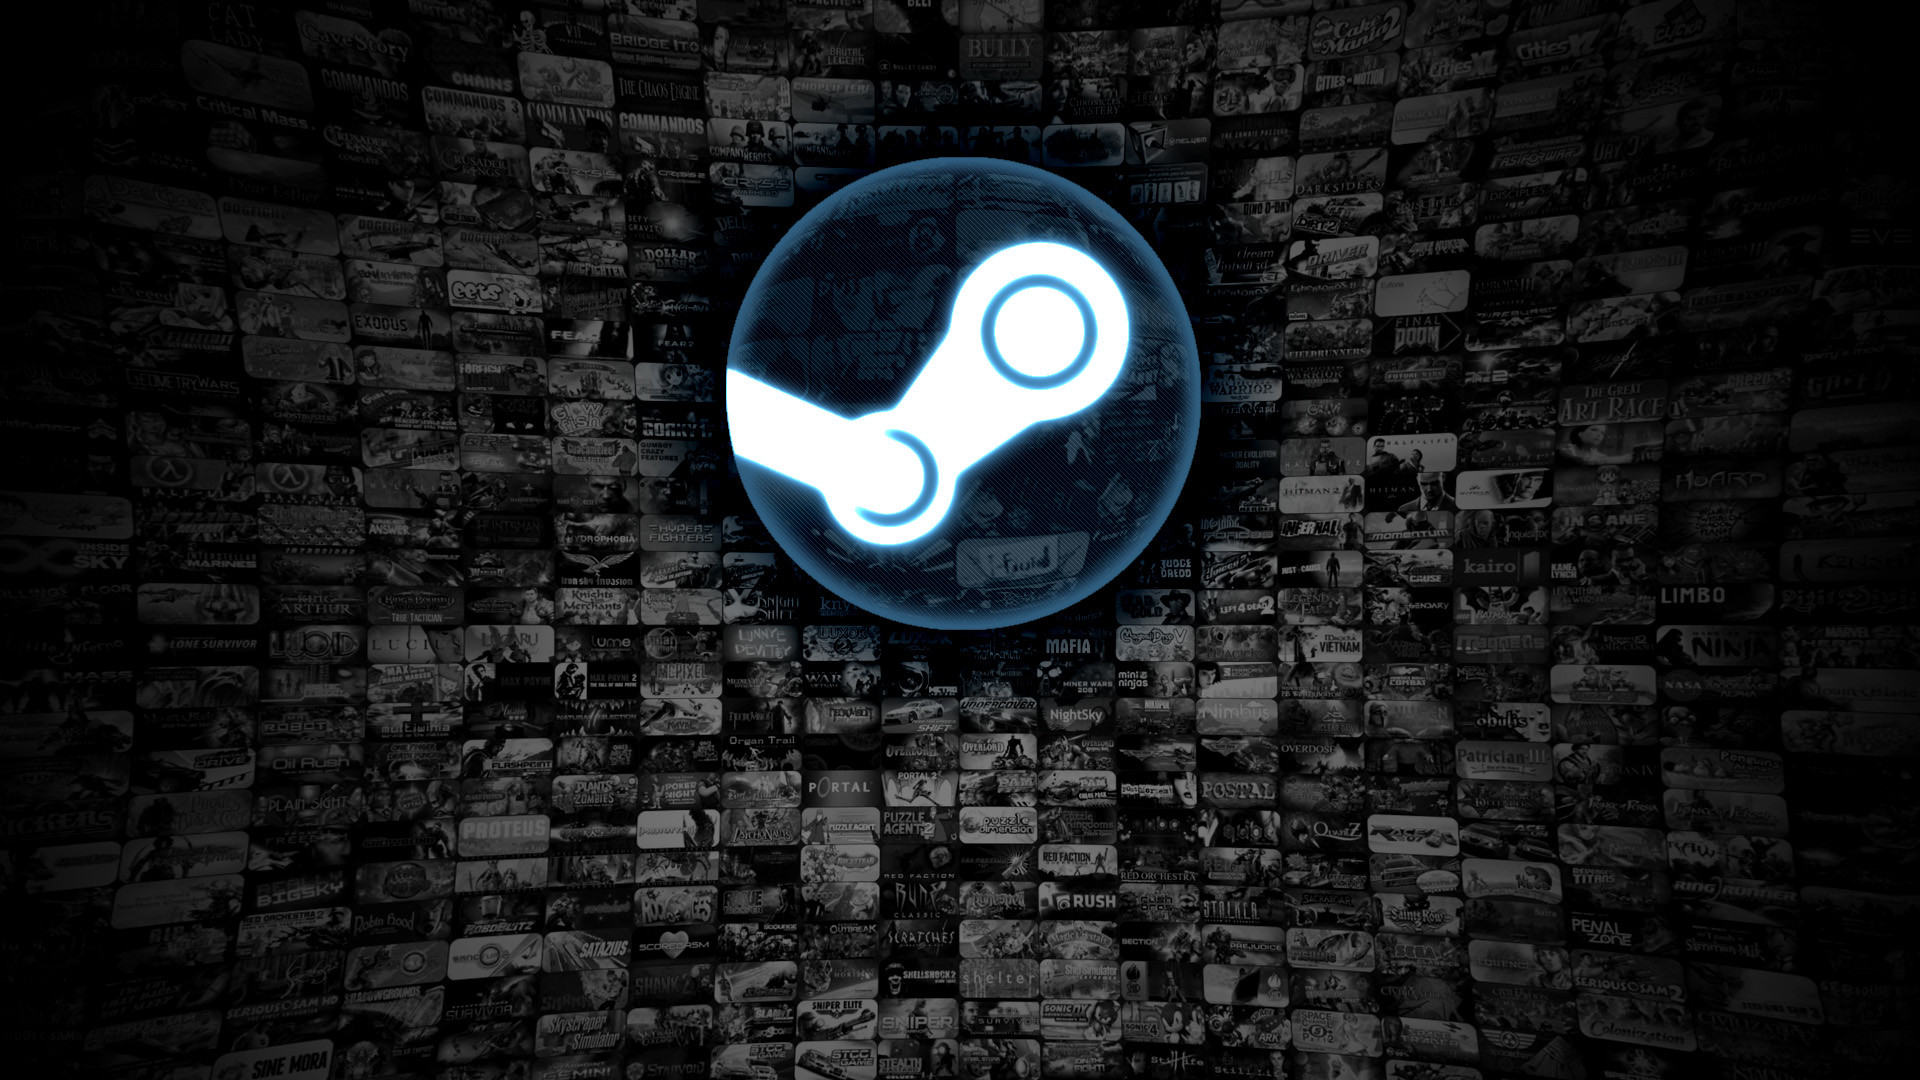 1920x1080 Steam images Steam HD wallpaper and background photos